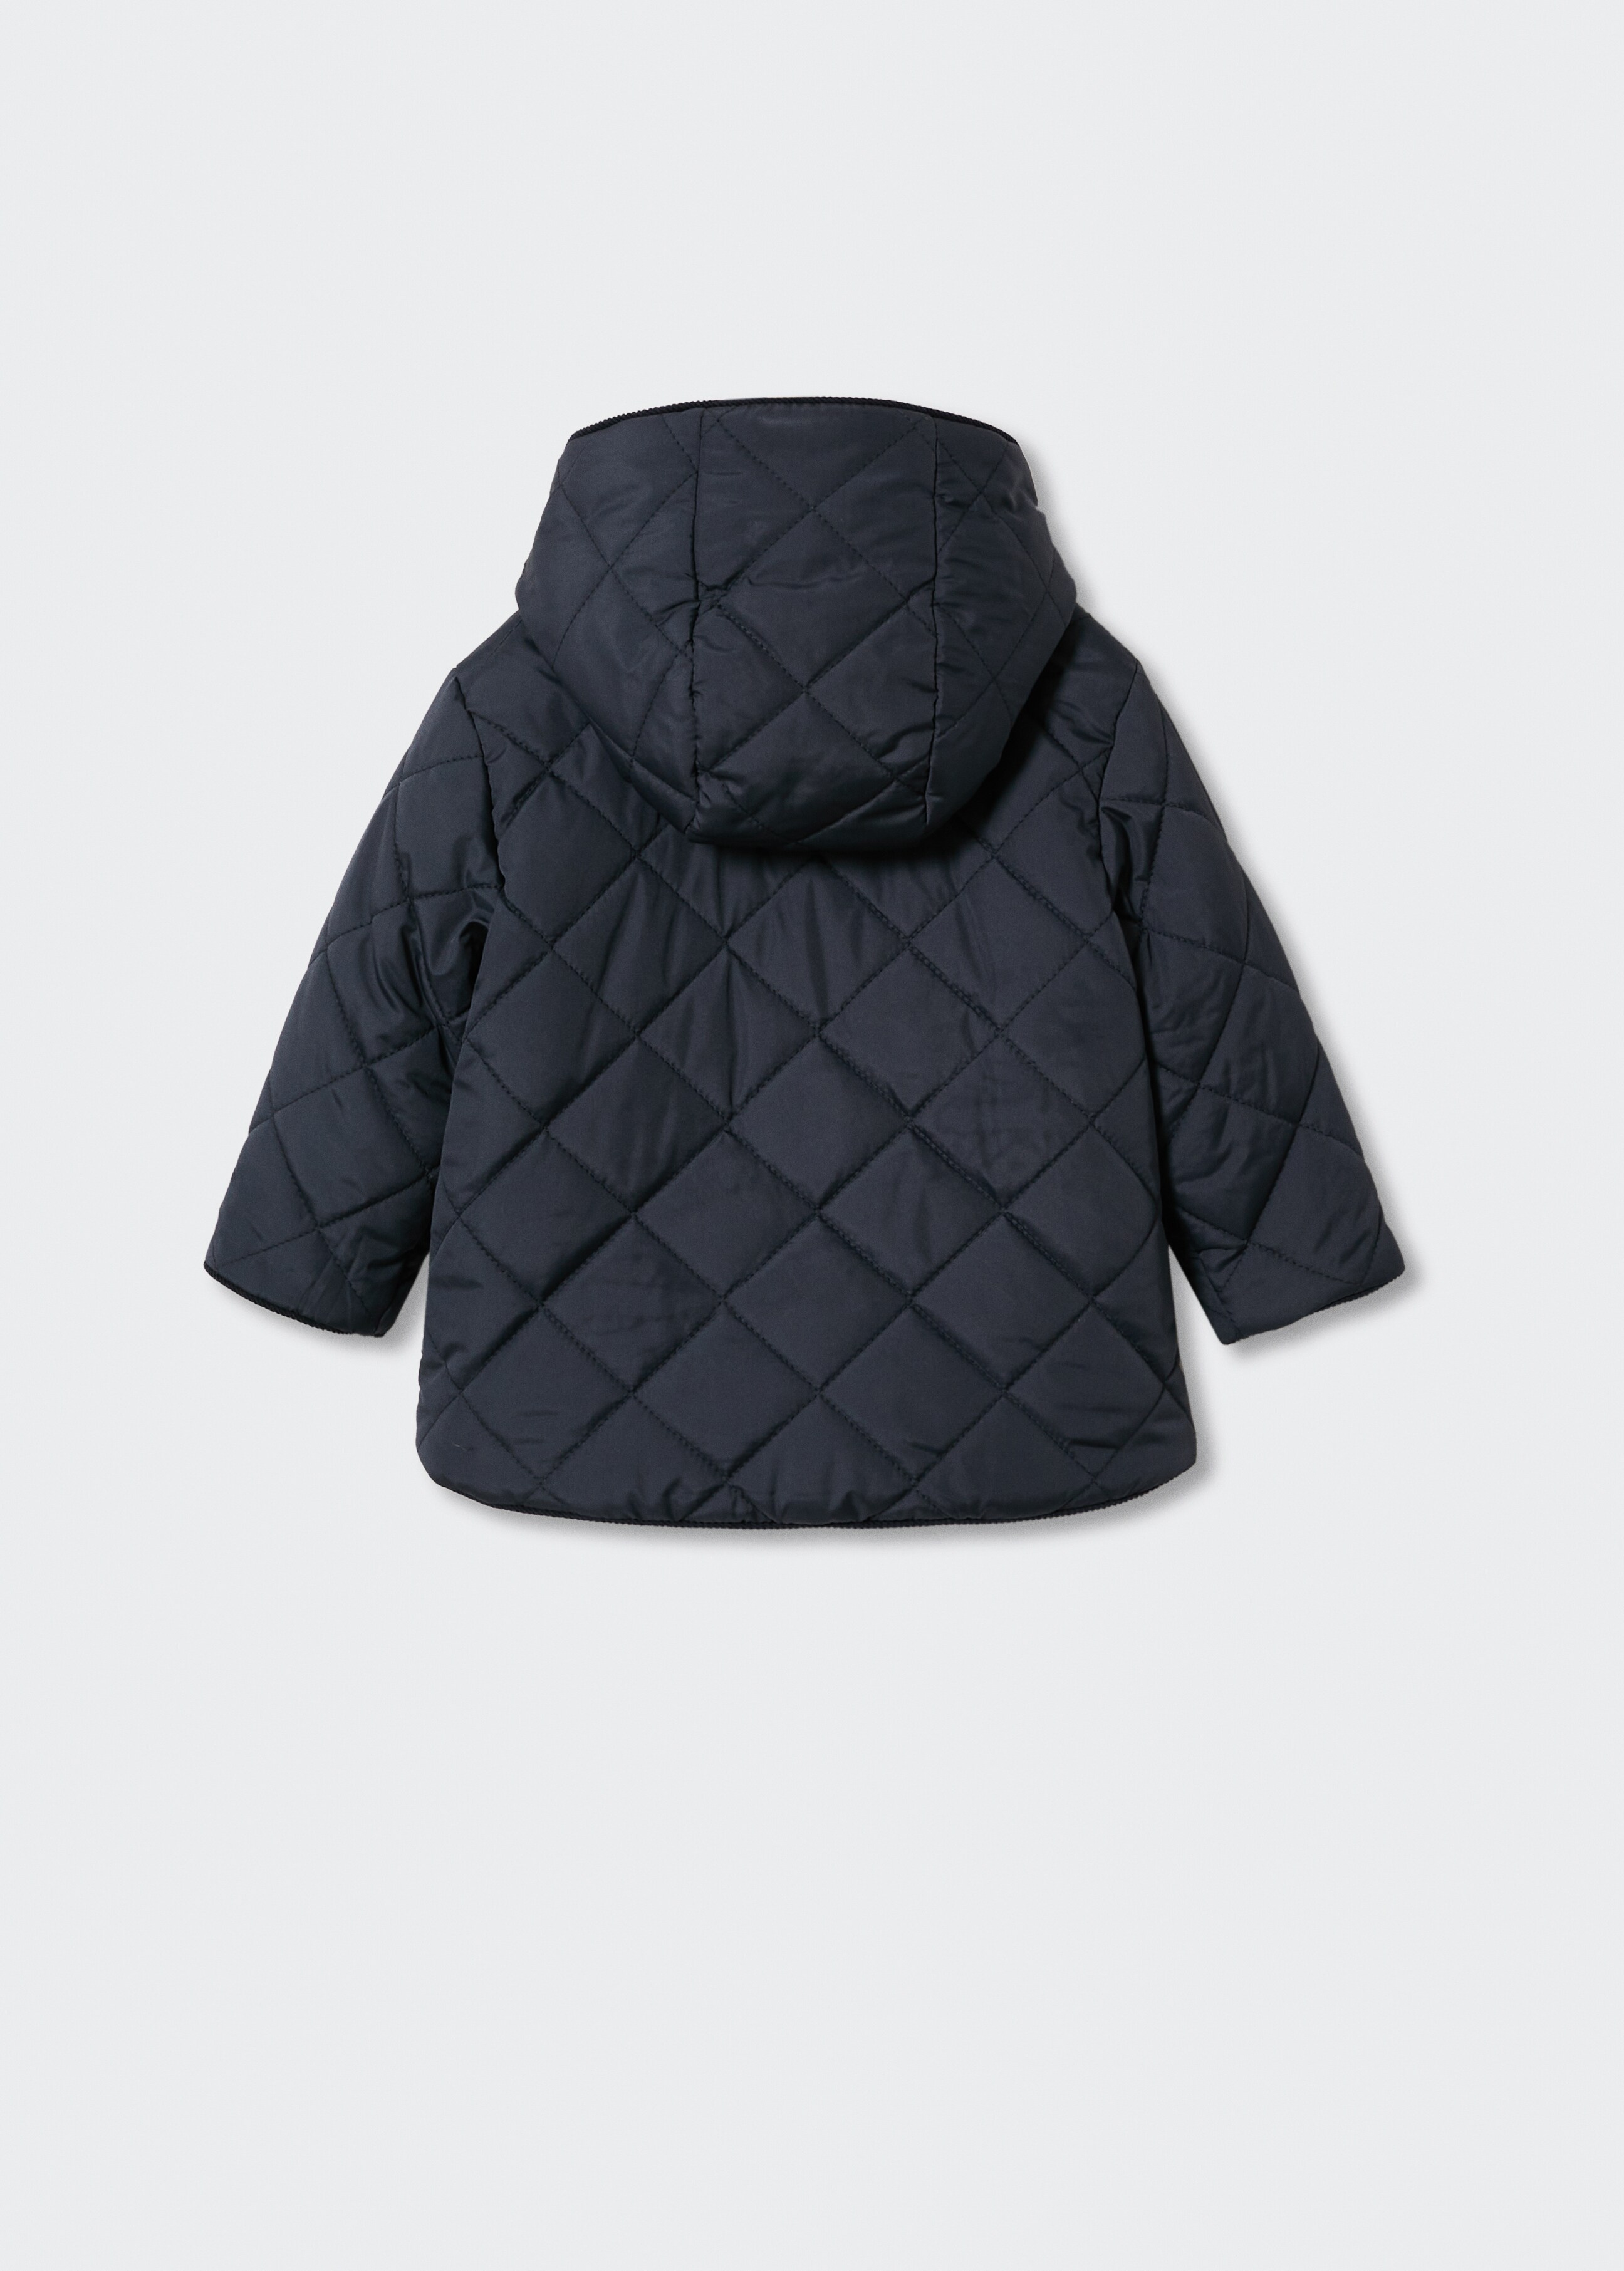 Rhombus quilted jacket - Reverse of the article